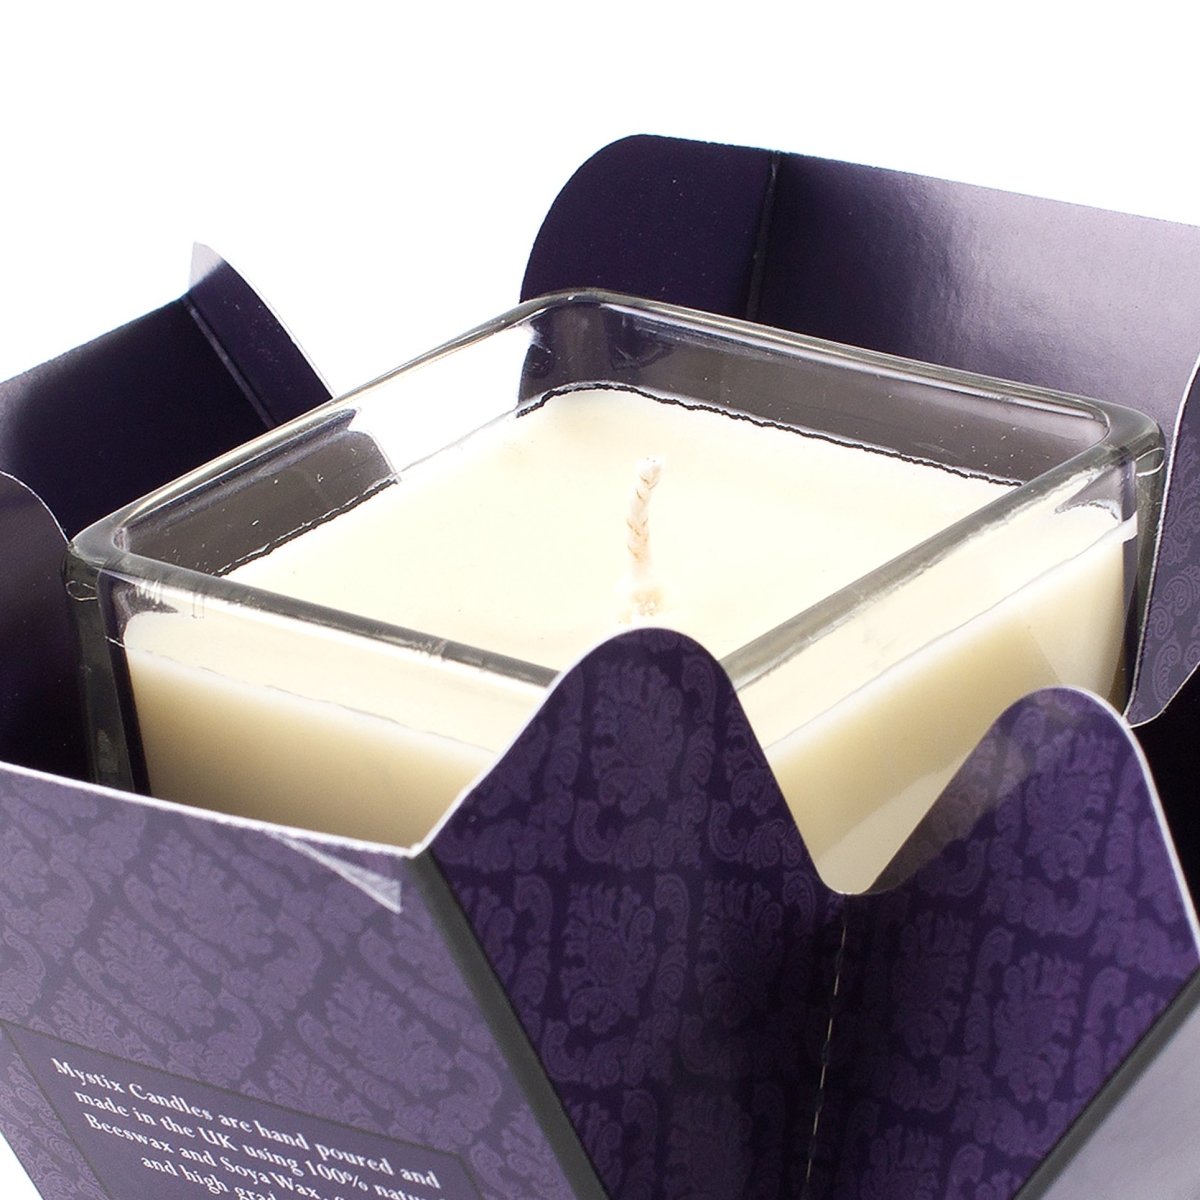 Mulled Wine & Clove Scented Candle - Mystic Moments UK